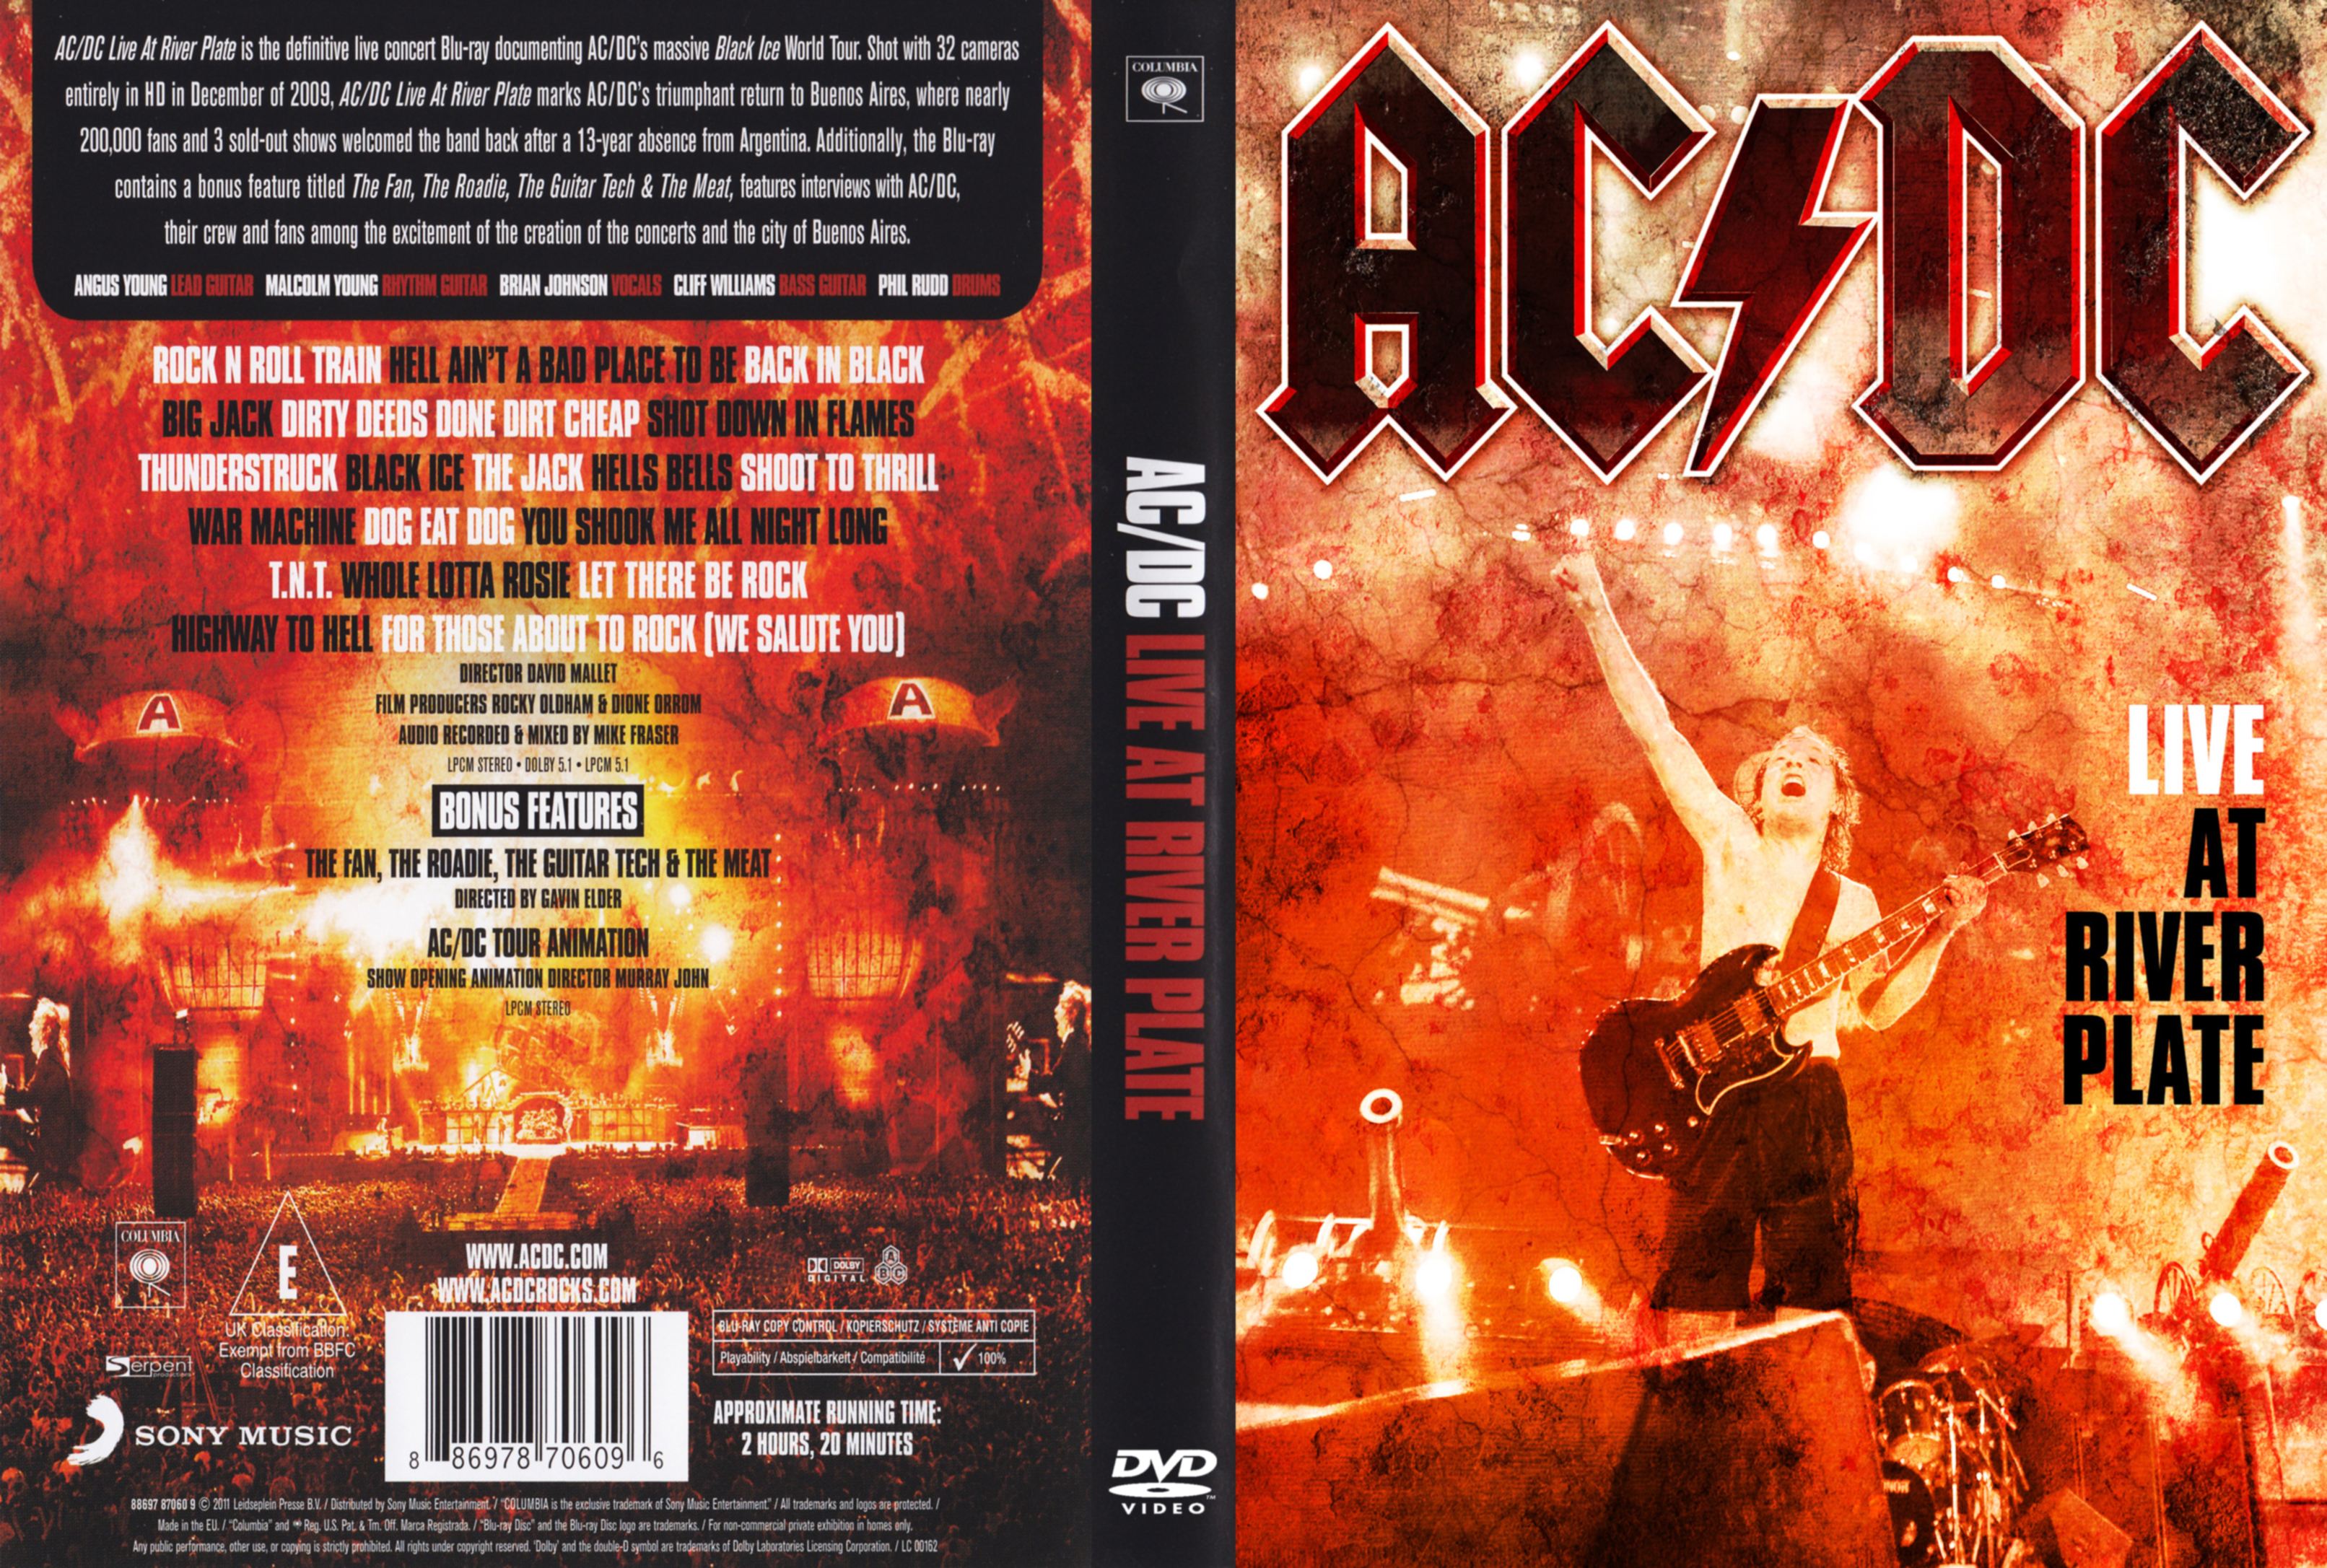 Jaquette DVD ACDC Live at River Plate 2009